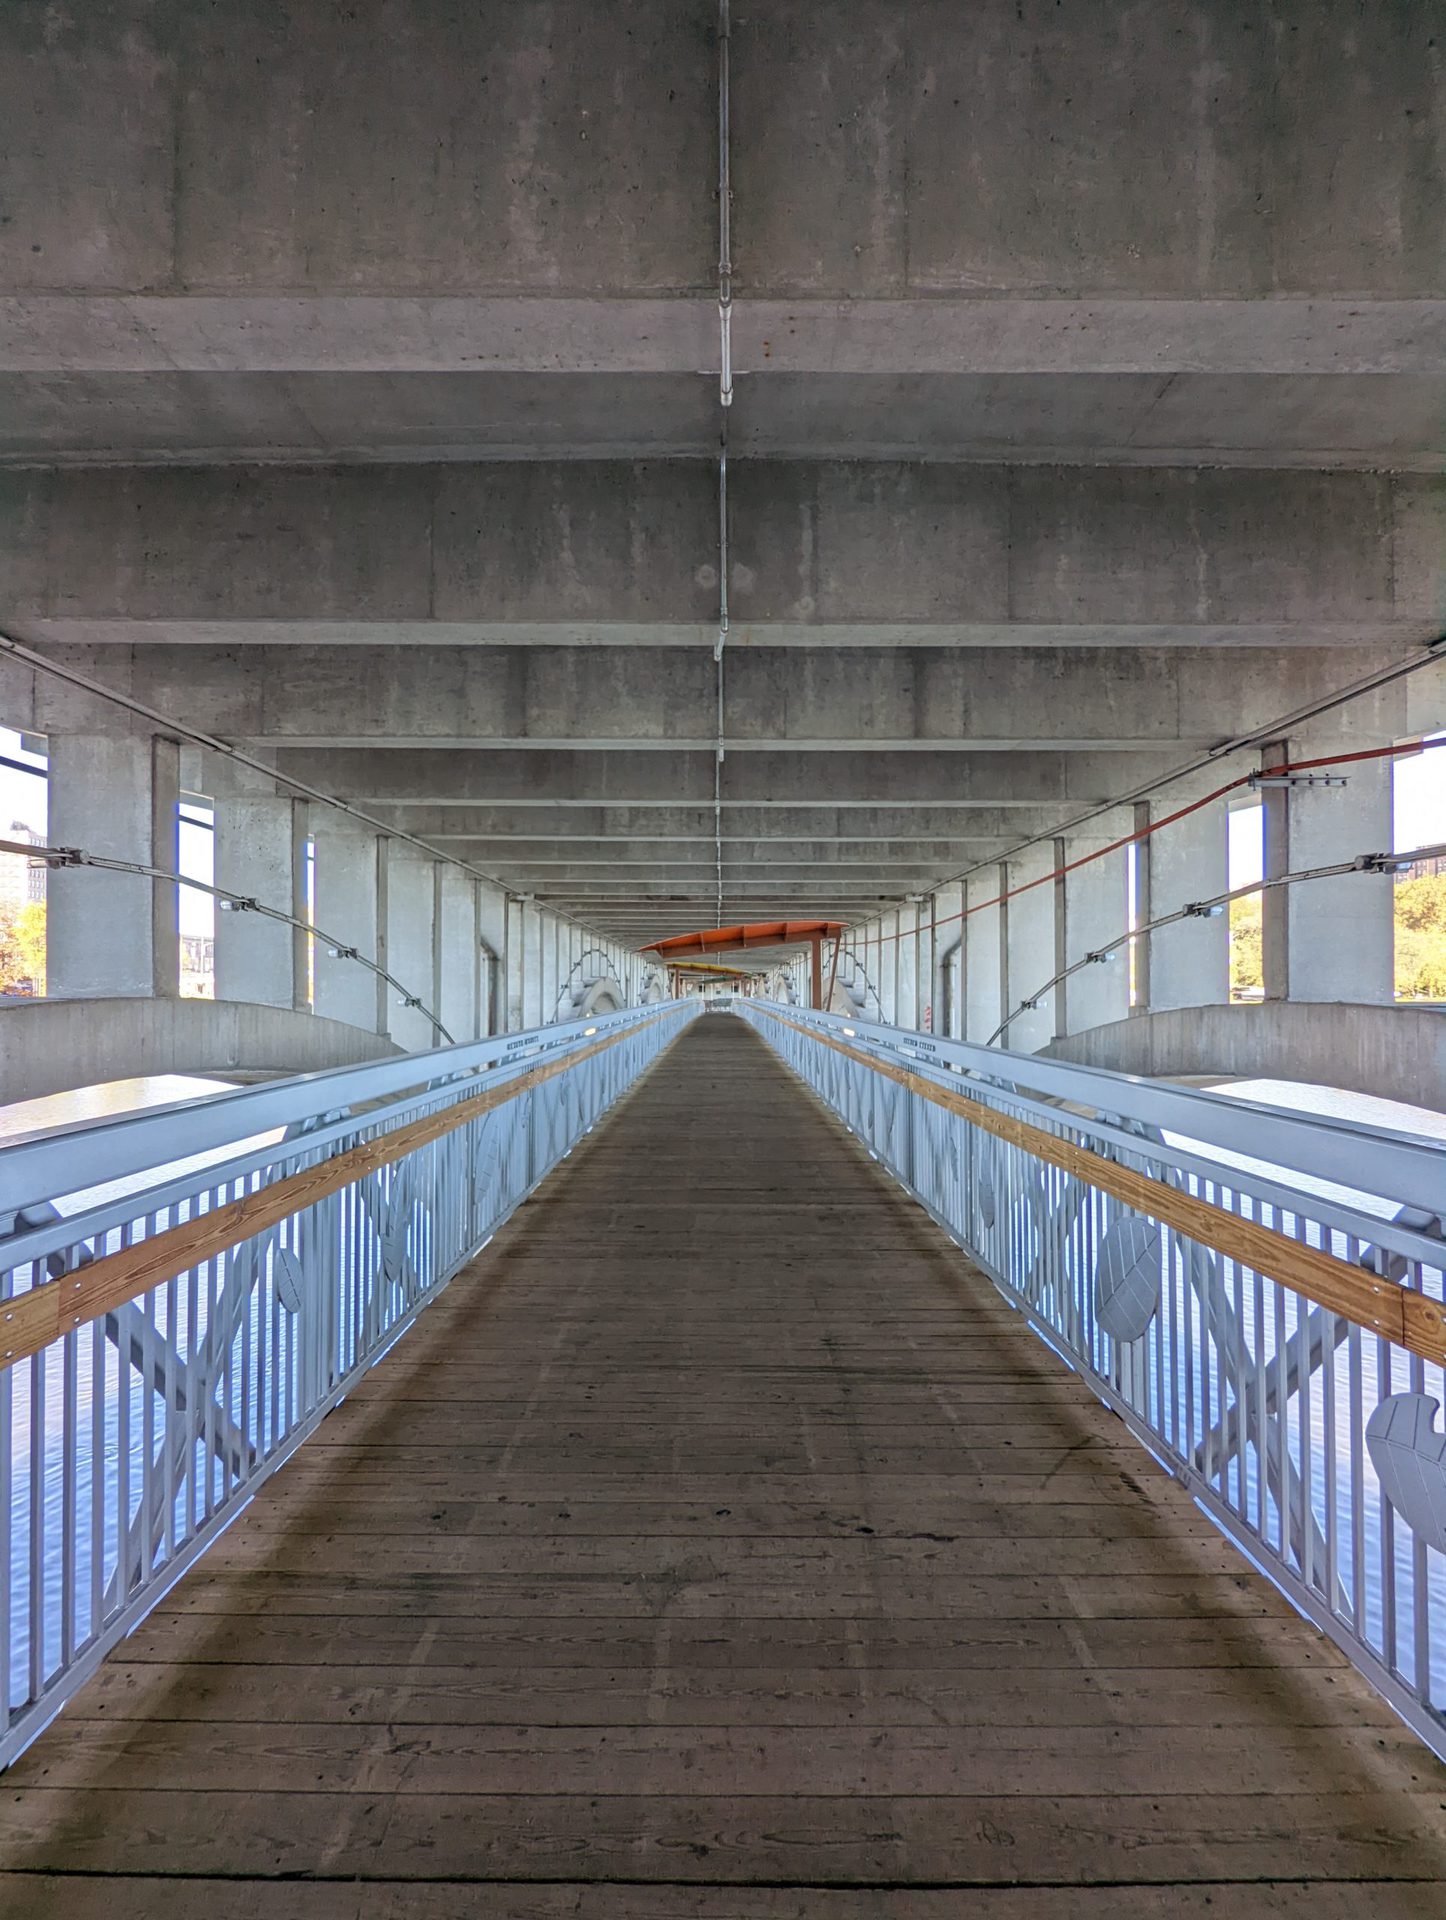 An image of a bridge taken with the Google Pixel 6 camera